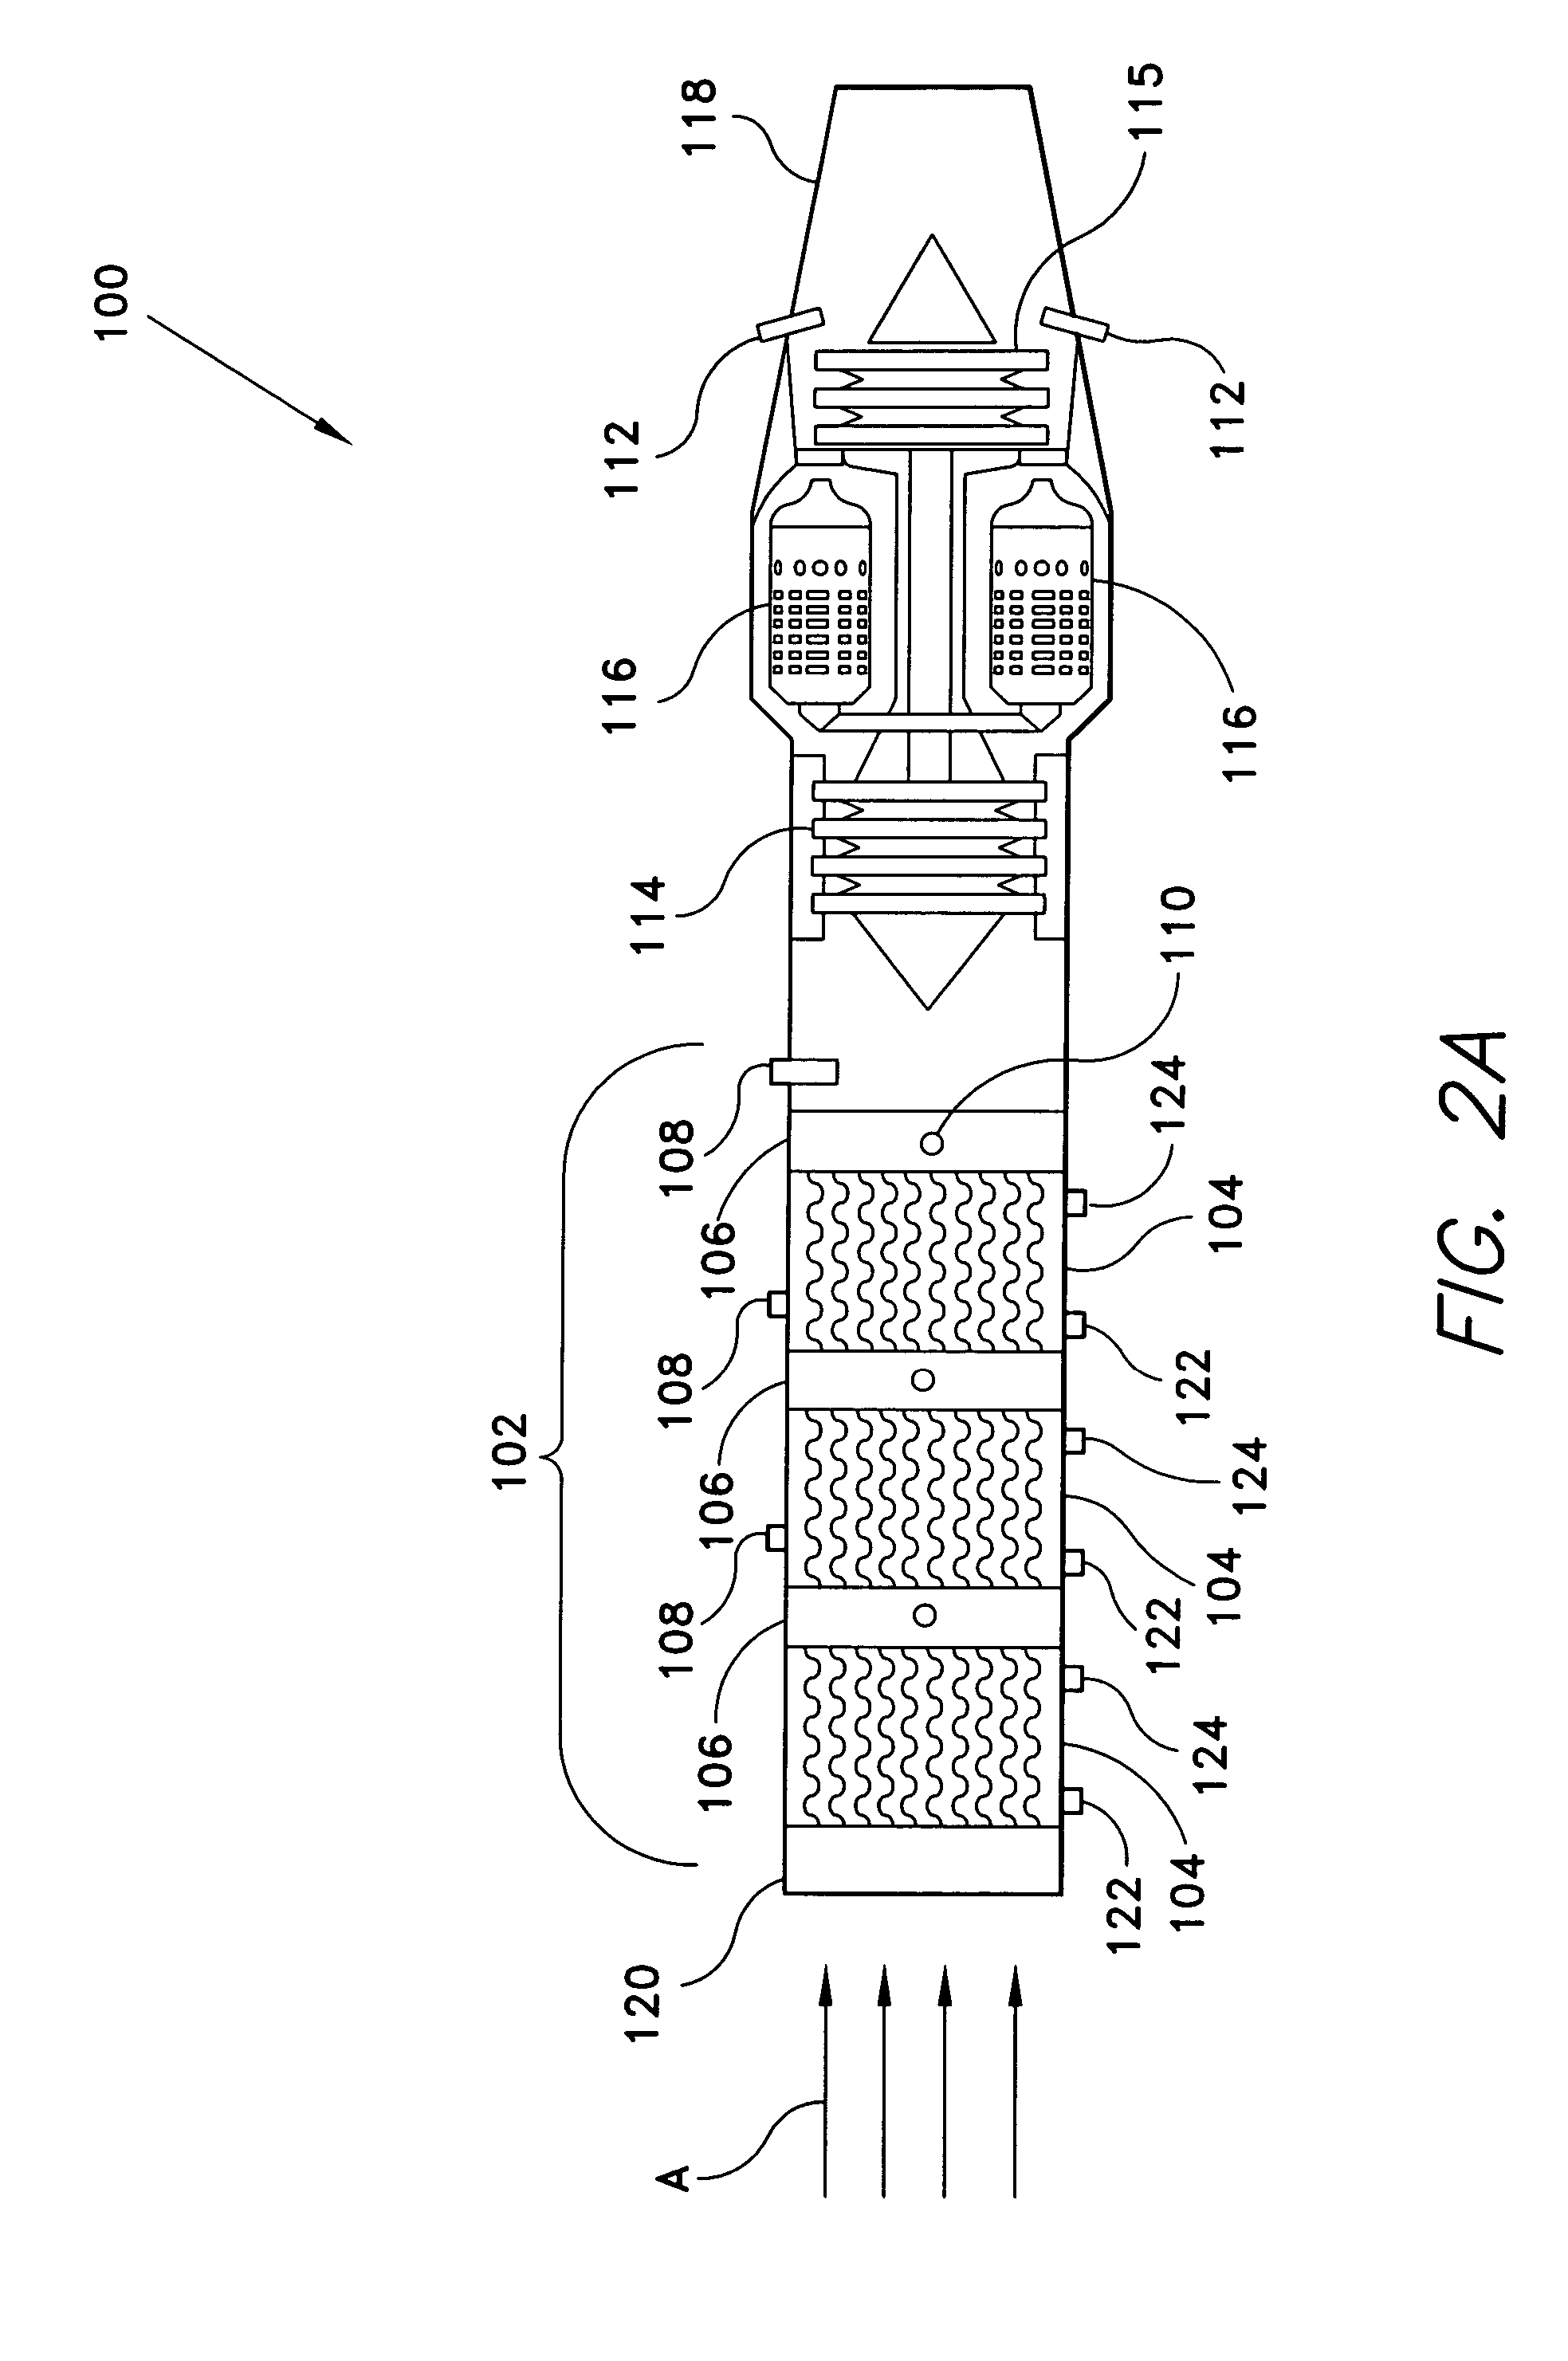 Jet aircraft electrical energy production system